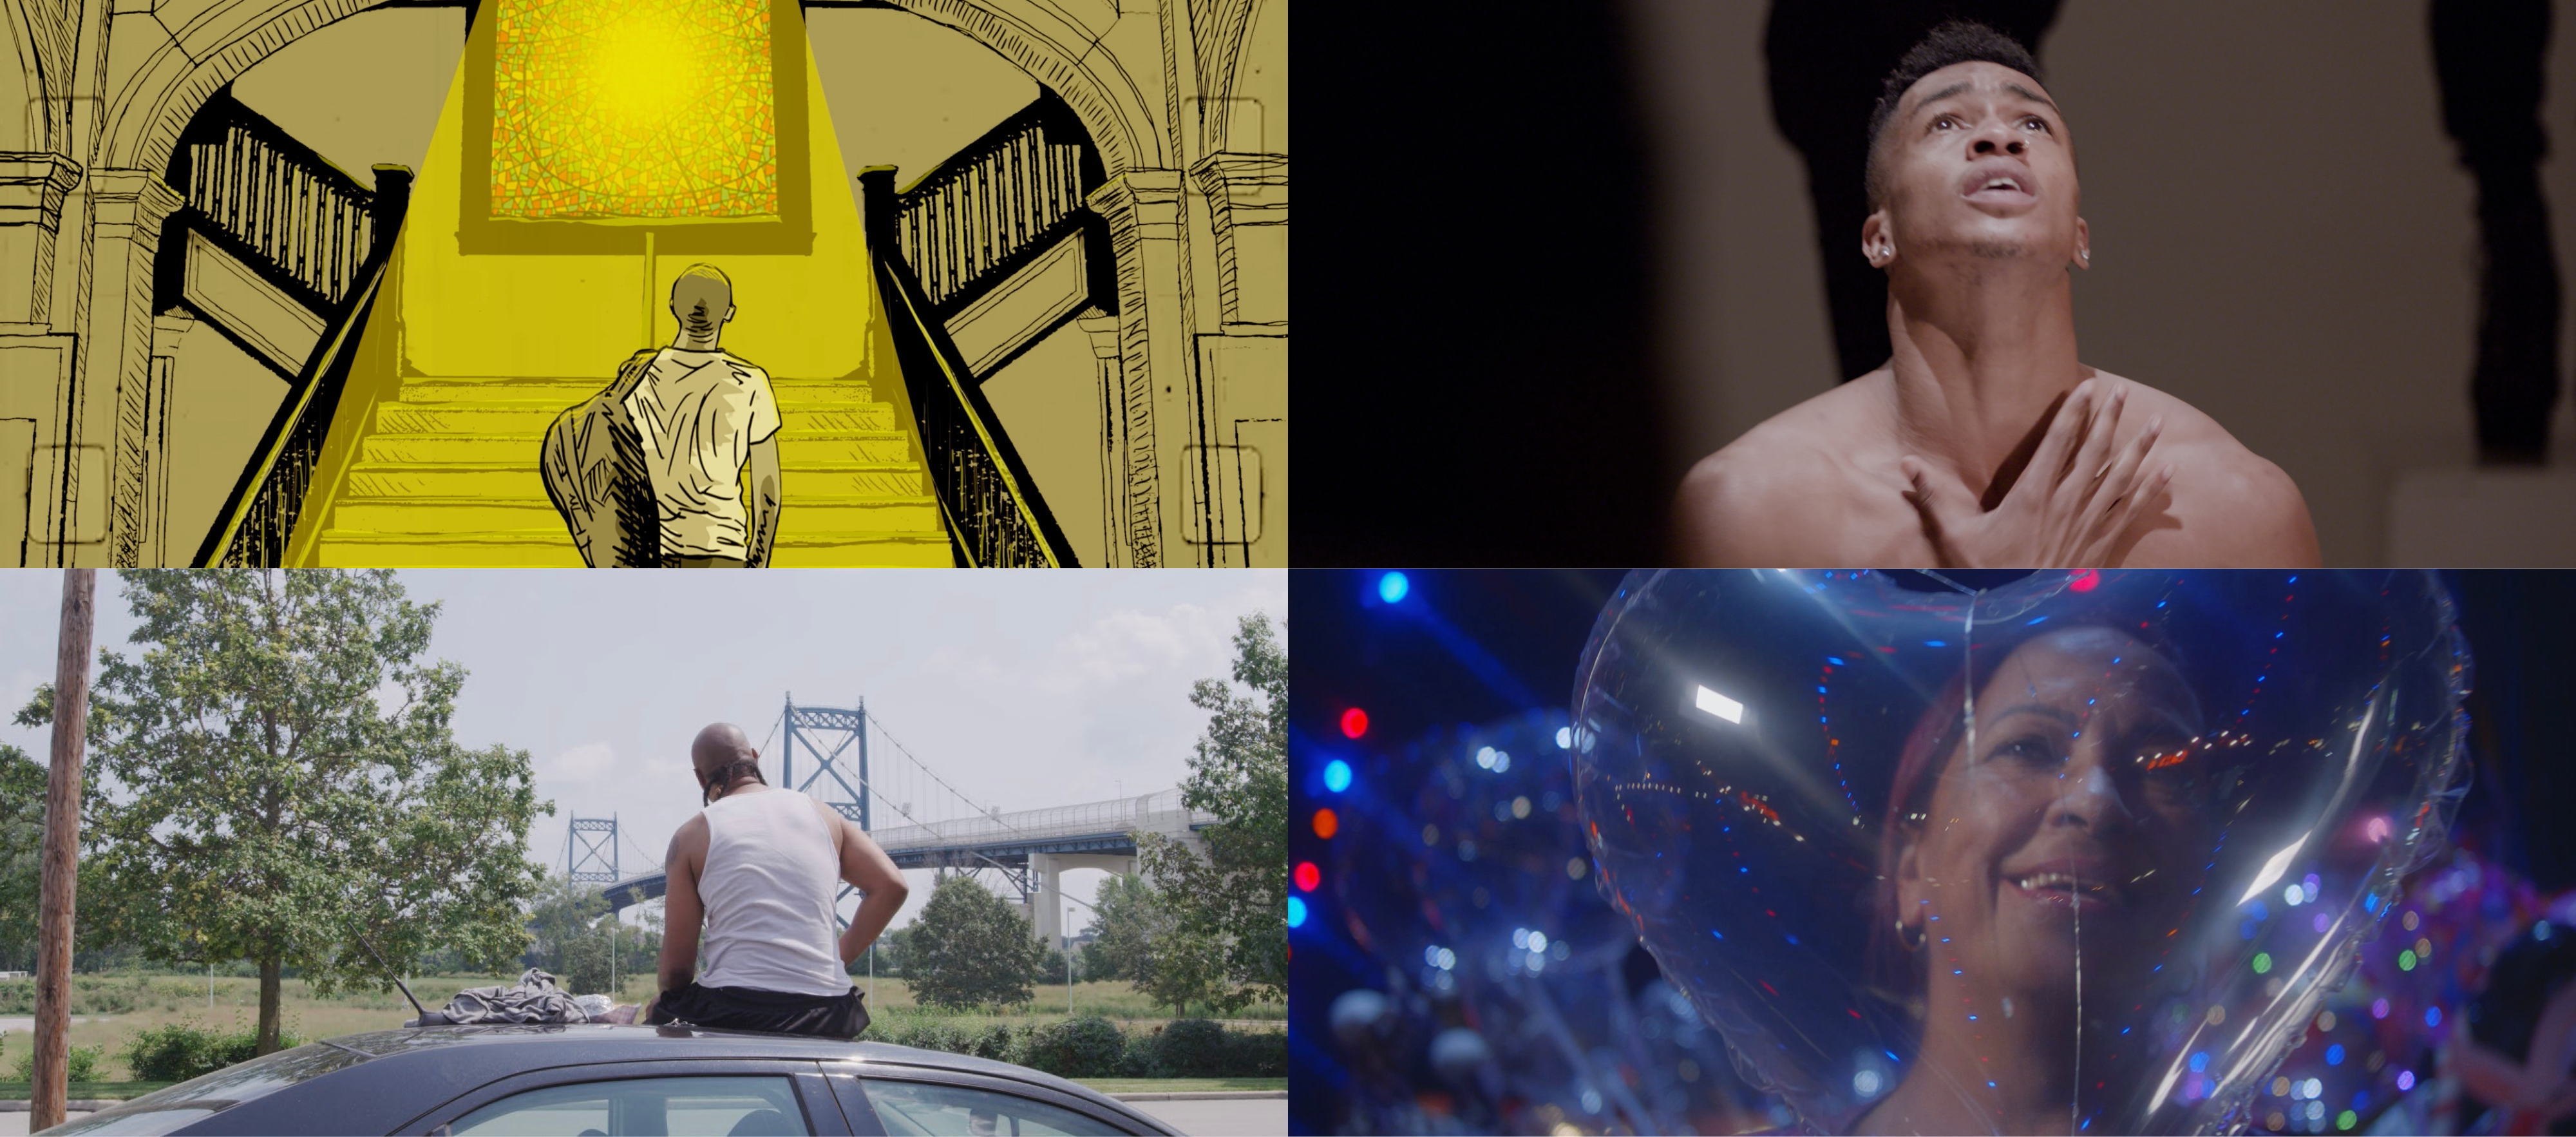 Clockwise from top left: Animated still of a person standing at the foot of a stairway lit with yellow light from a stained-glass window at the top of the stairs; still of a person looking up and holding their hand to their bare chest; still of a person sitting on top of a car, back to the camera, facing a bridge and greenish-yellow landscape in the background; still of a person smiling behind a transparent, heart-shaped balloon, with colorful lights twinkling throughout the image.